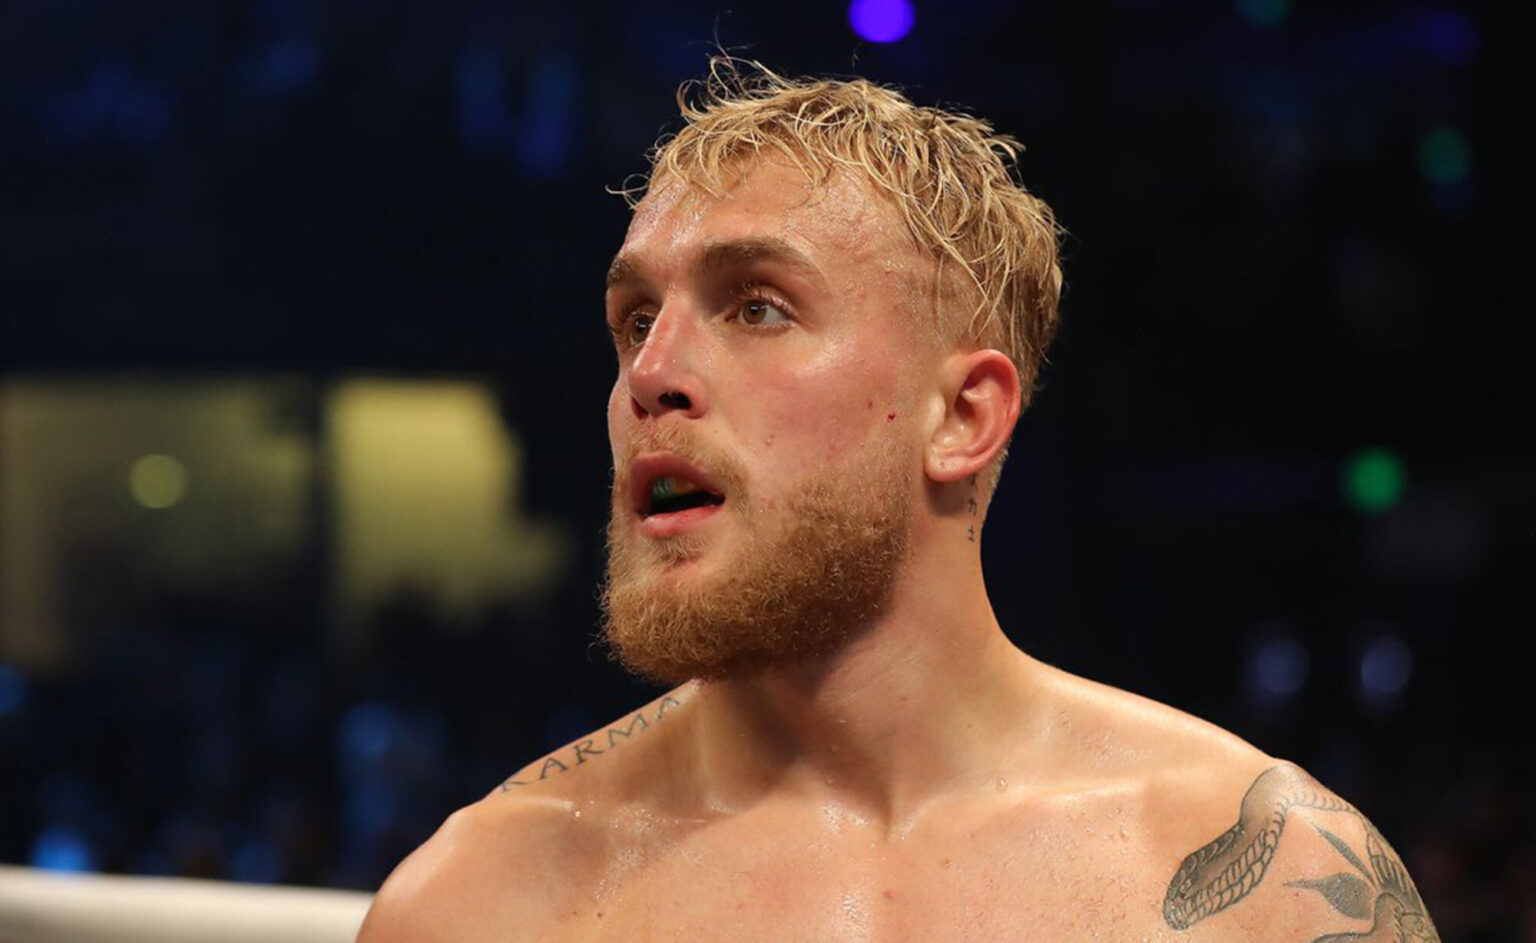 Are we in the midst of UFC's next great fighter? Jake Paul is ready to dive right into his boxing career. Here's everything we know about Jake Paul.